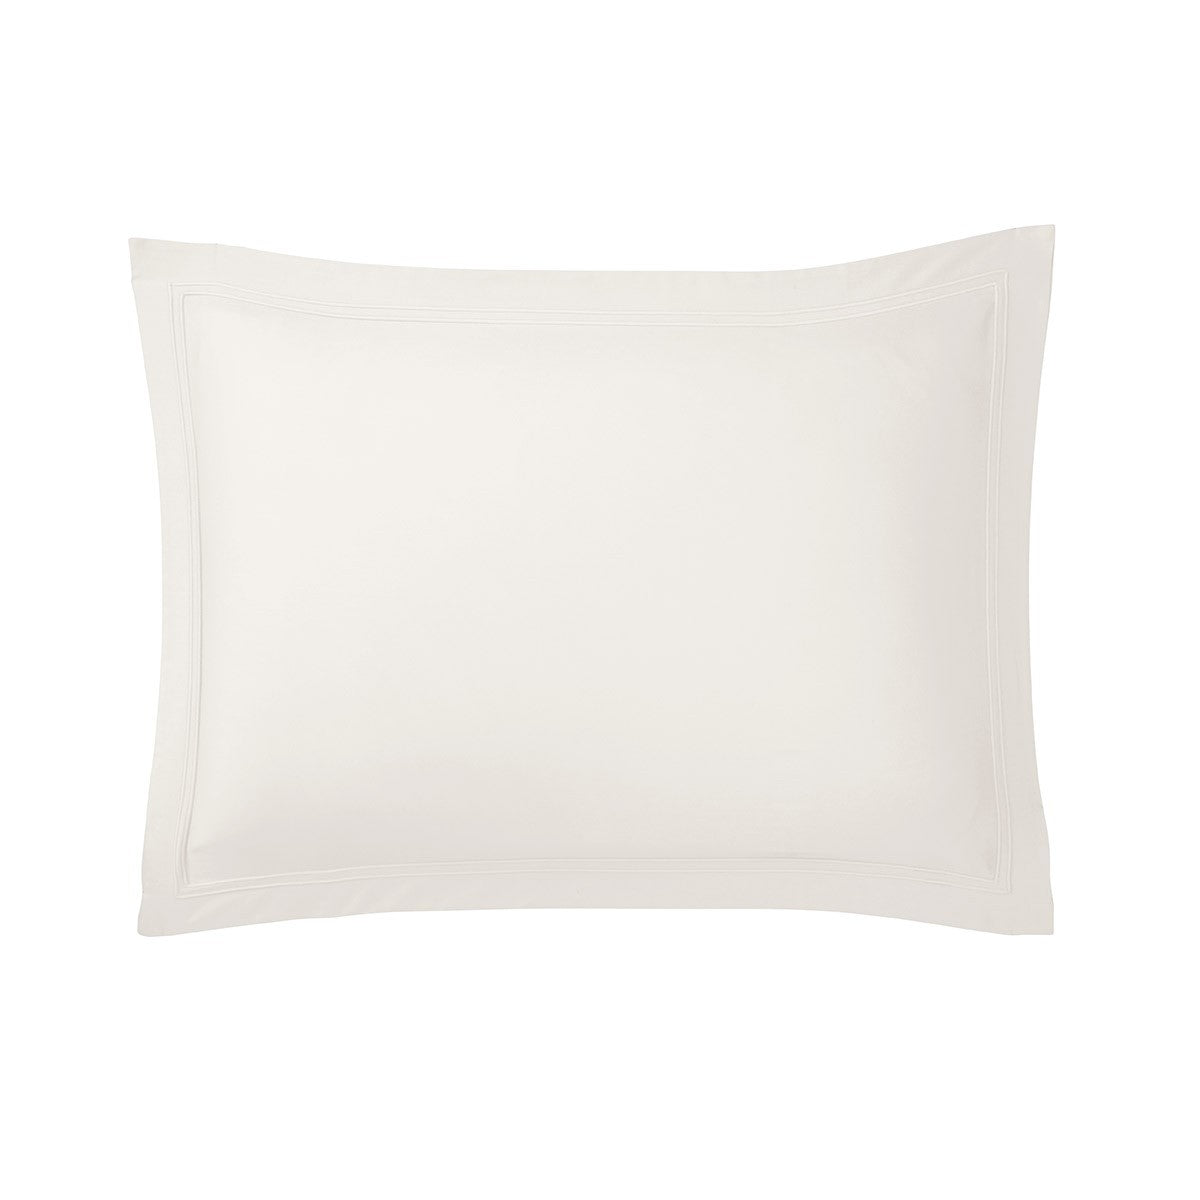 shop-the-official-shop-of-yves-delorme-triomphe-bedding-collection-online-now_5.jpg